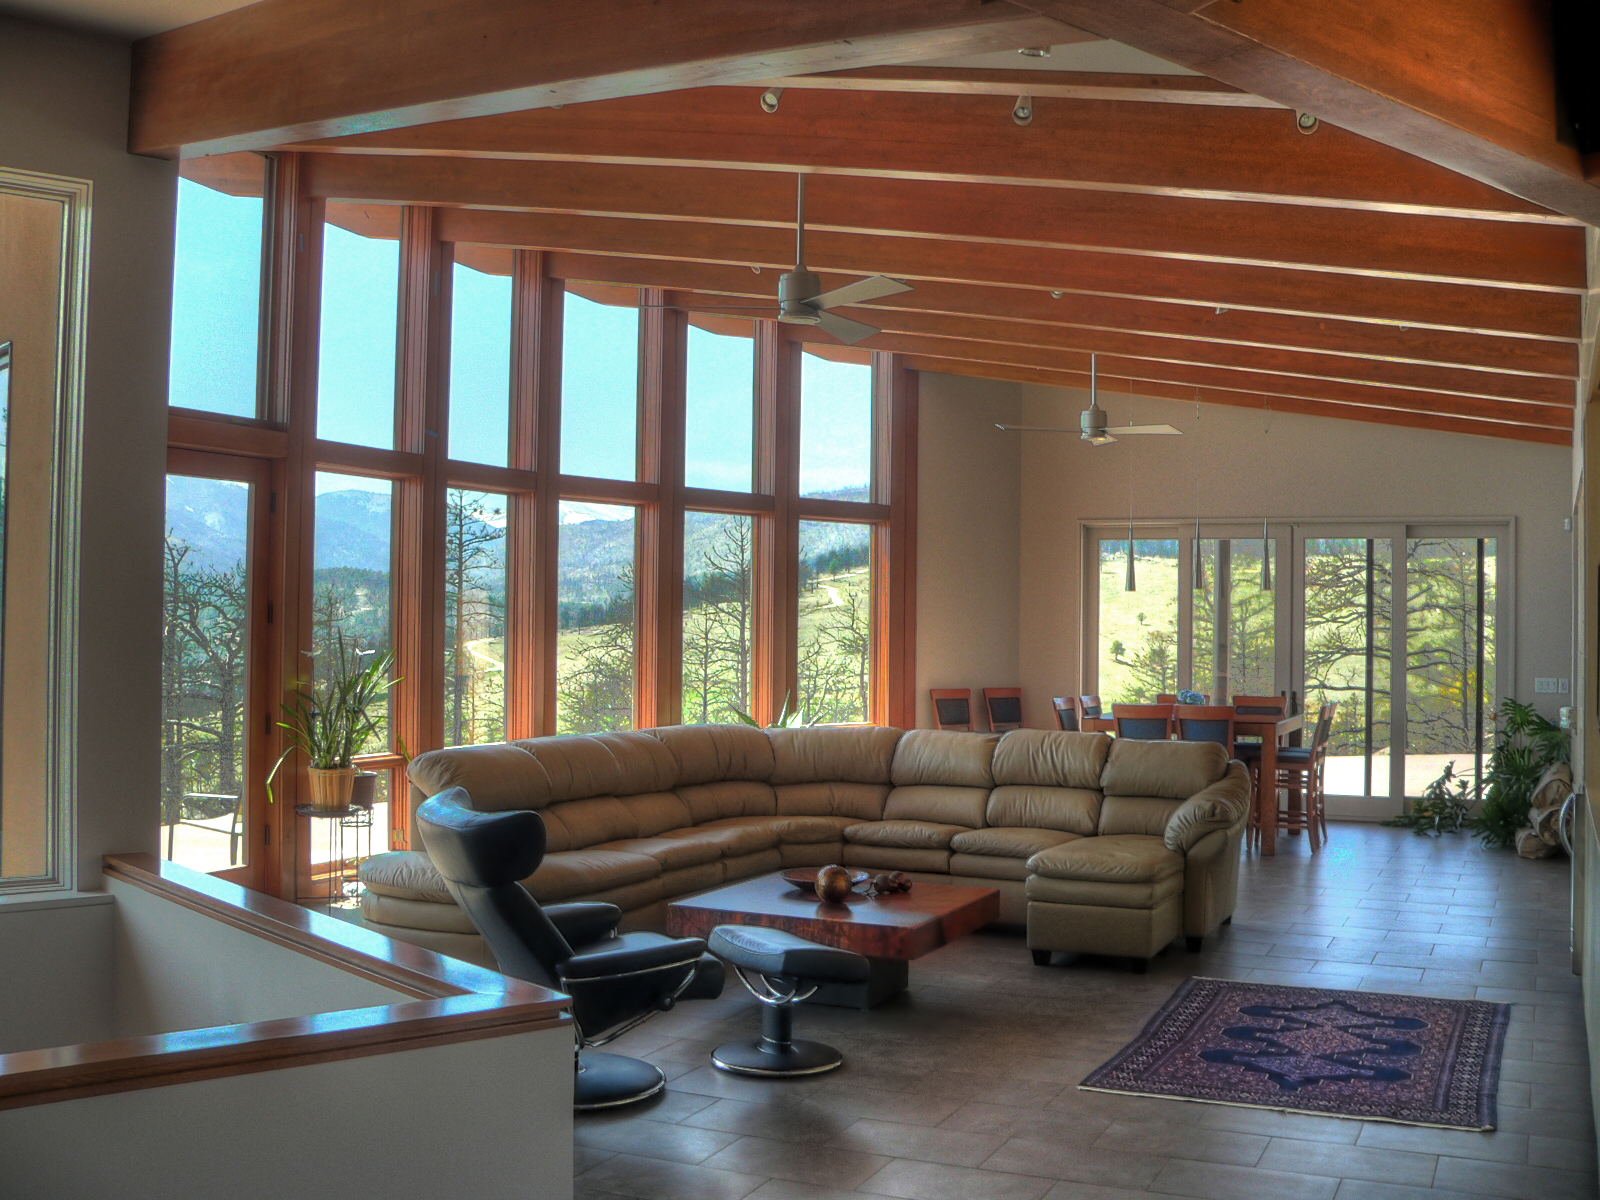 We saw first hand the importance of fire resistant home building after the Fourmile Canyon Fire, when we built this home for a family that had lost their home. 